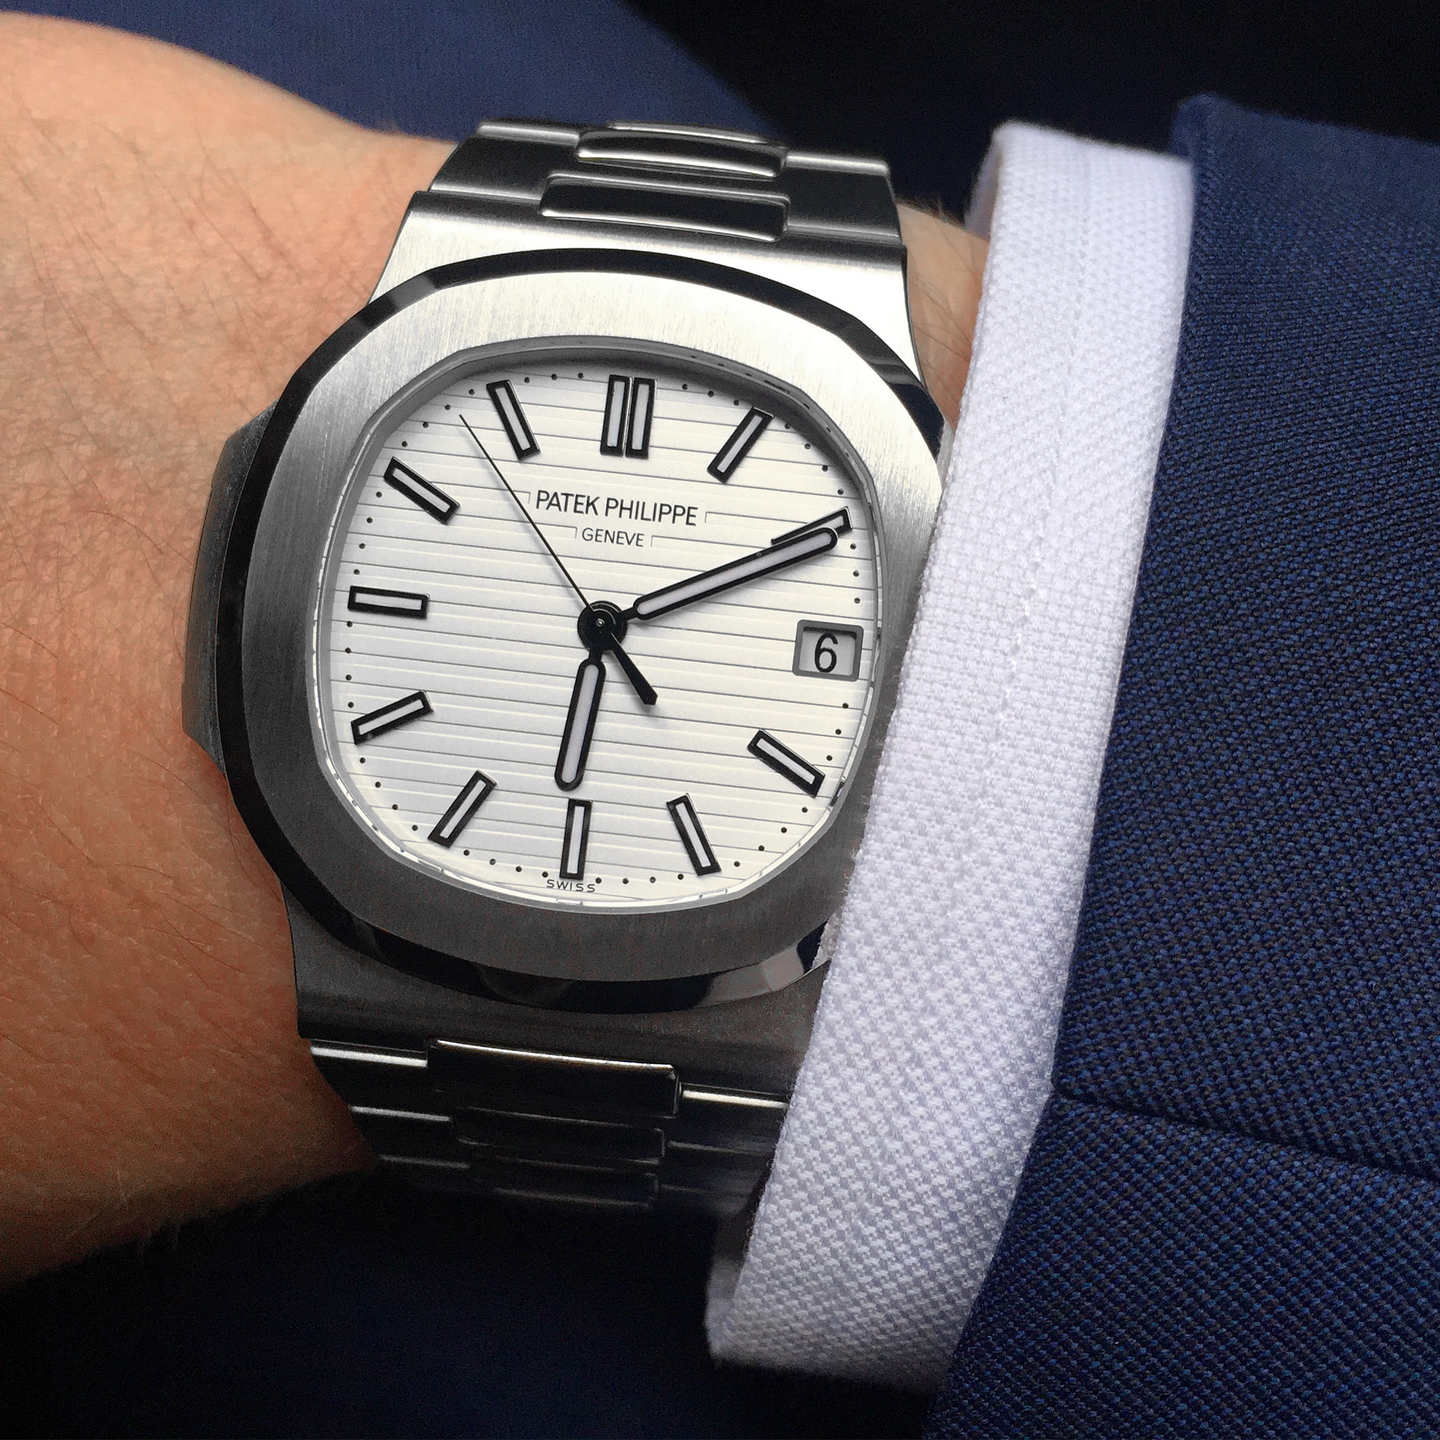 REVIEW: Patek Philippe Nautilus white dial reference 5711